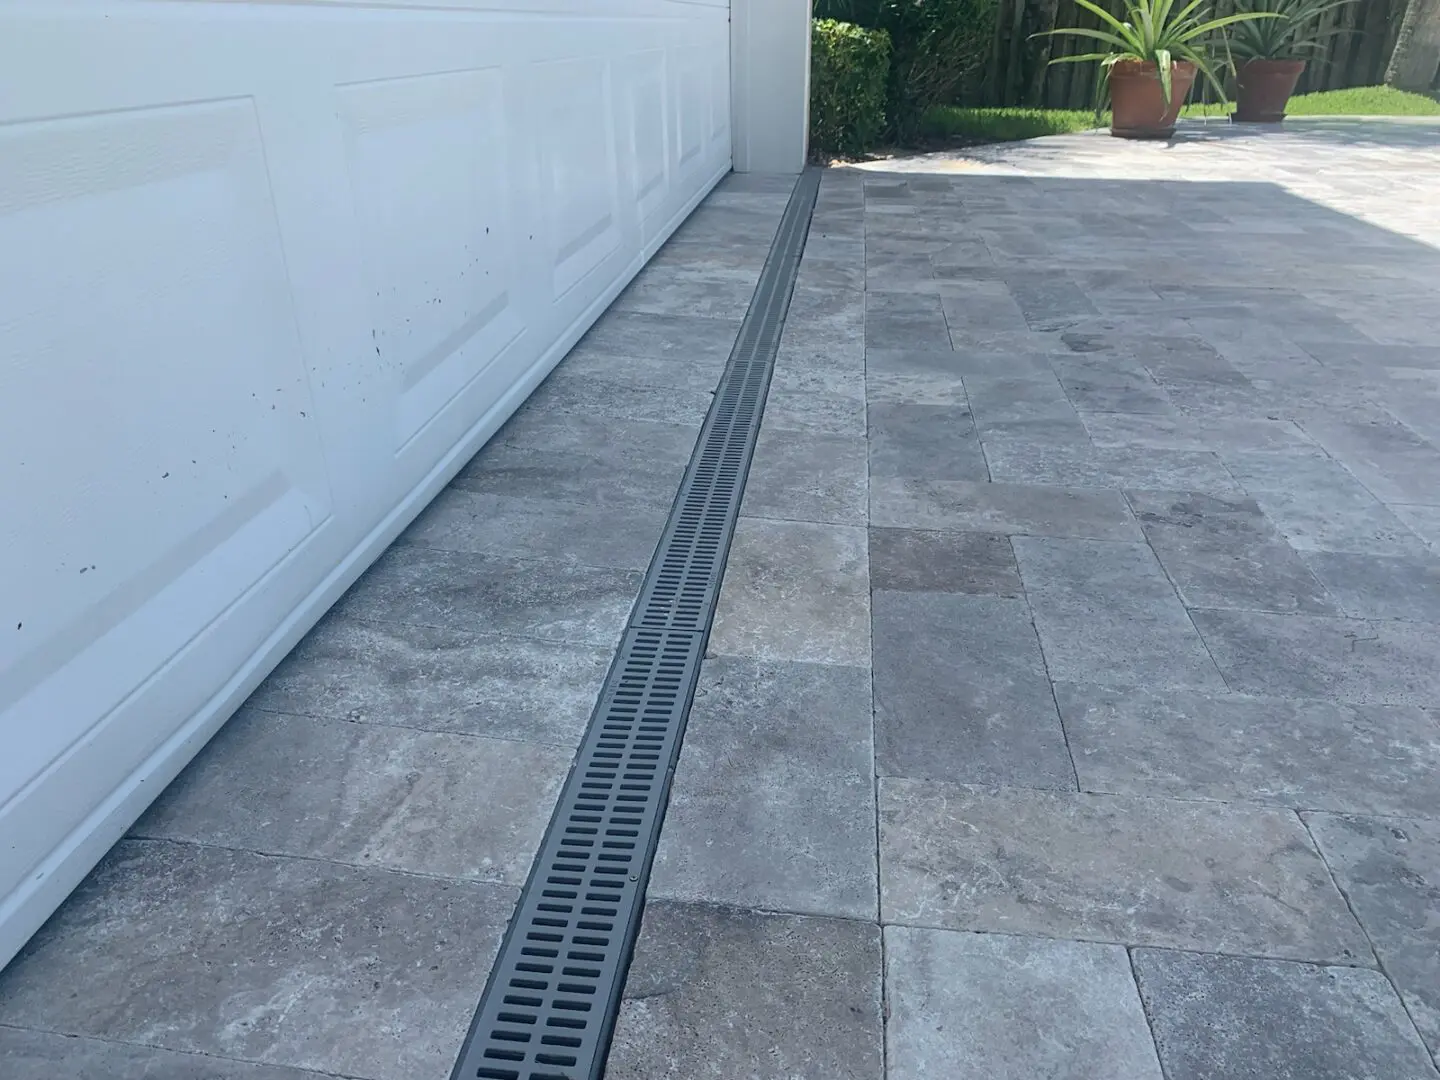 A tiled driveway with a linear drainage grate running parallel to a white garage door. Two potted plants are visible in the background.